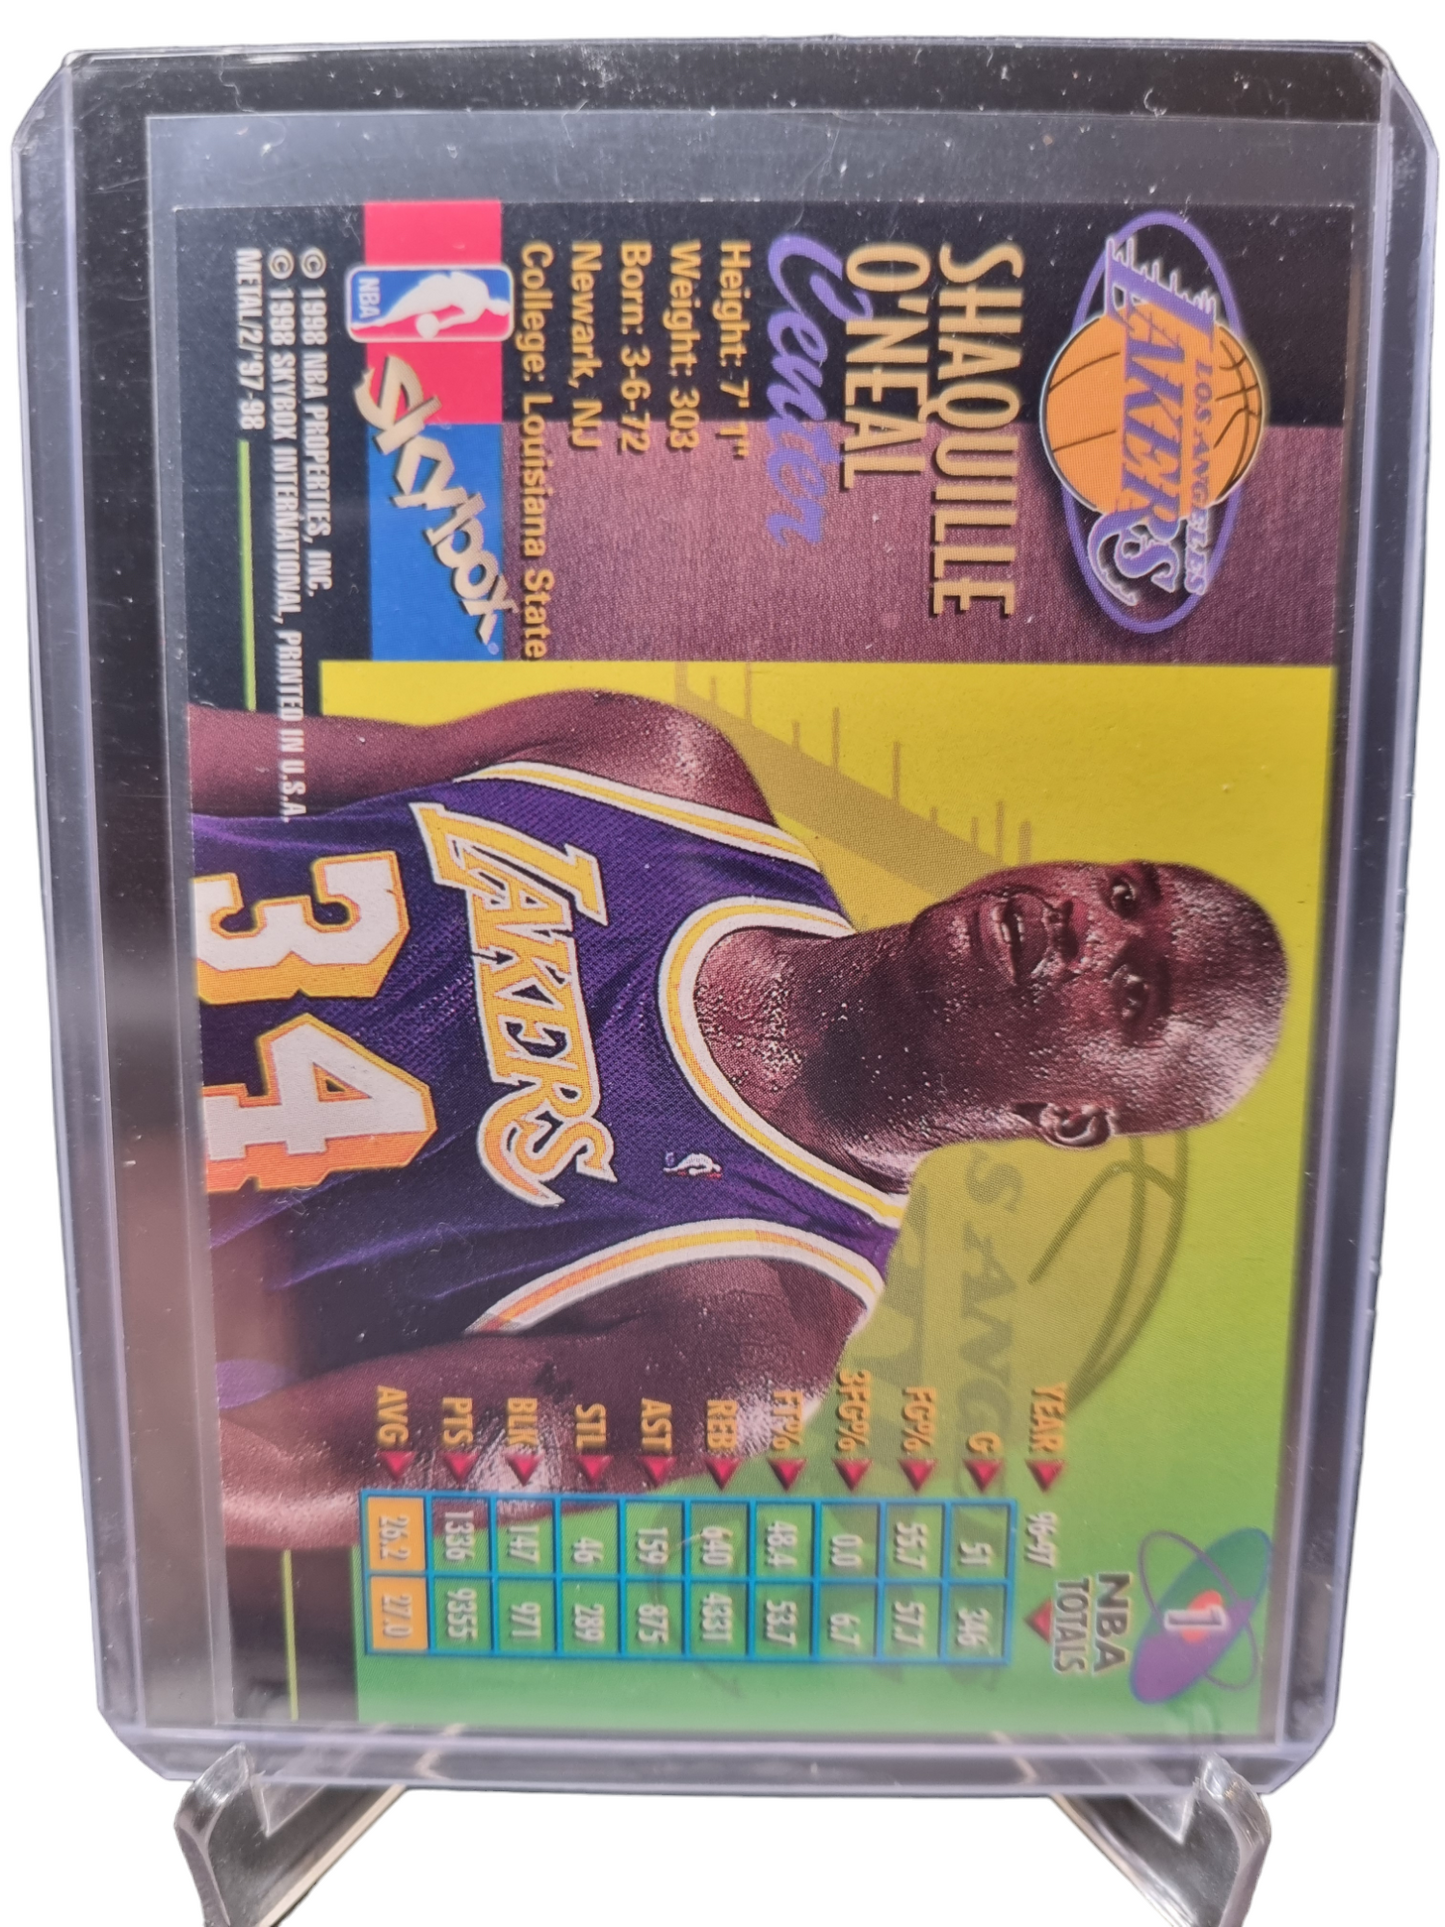 1997-98 Skybox #1 Shaquille O'Neal Metal Universe